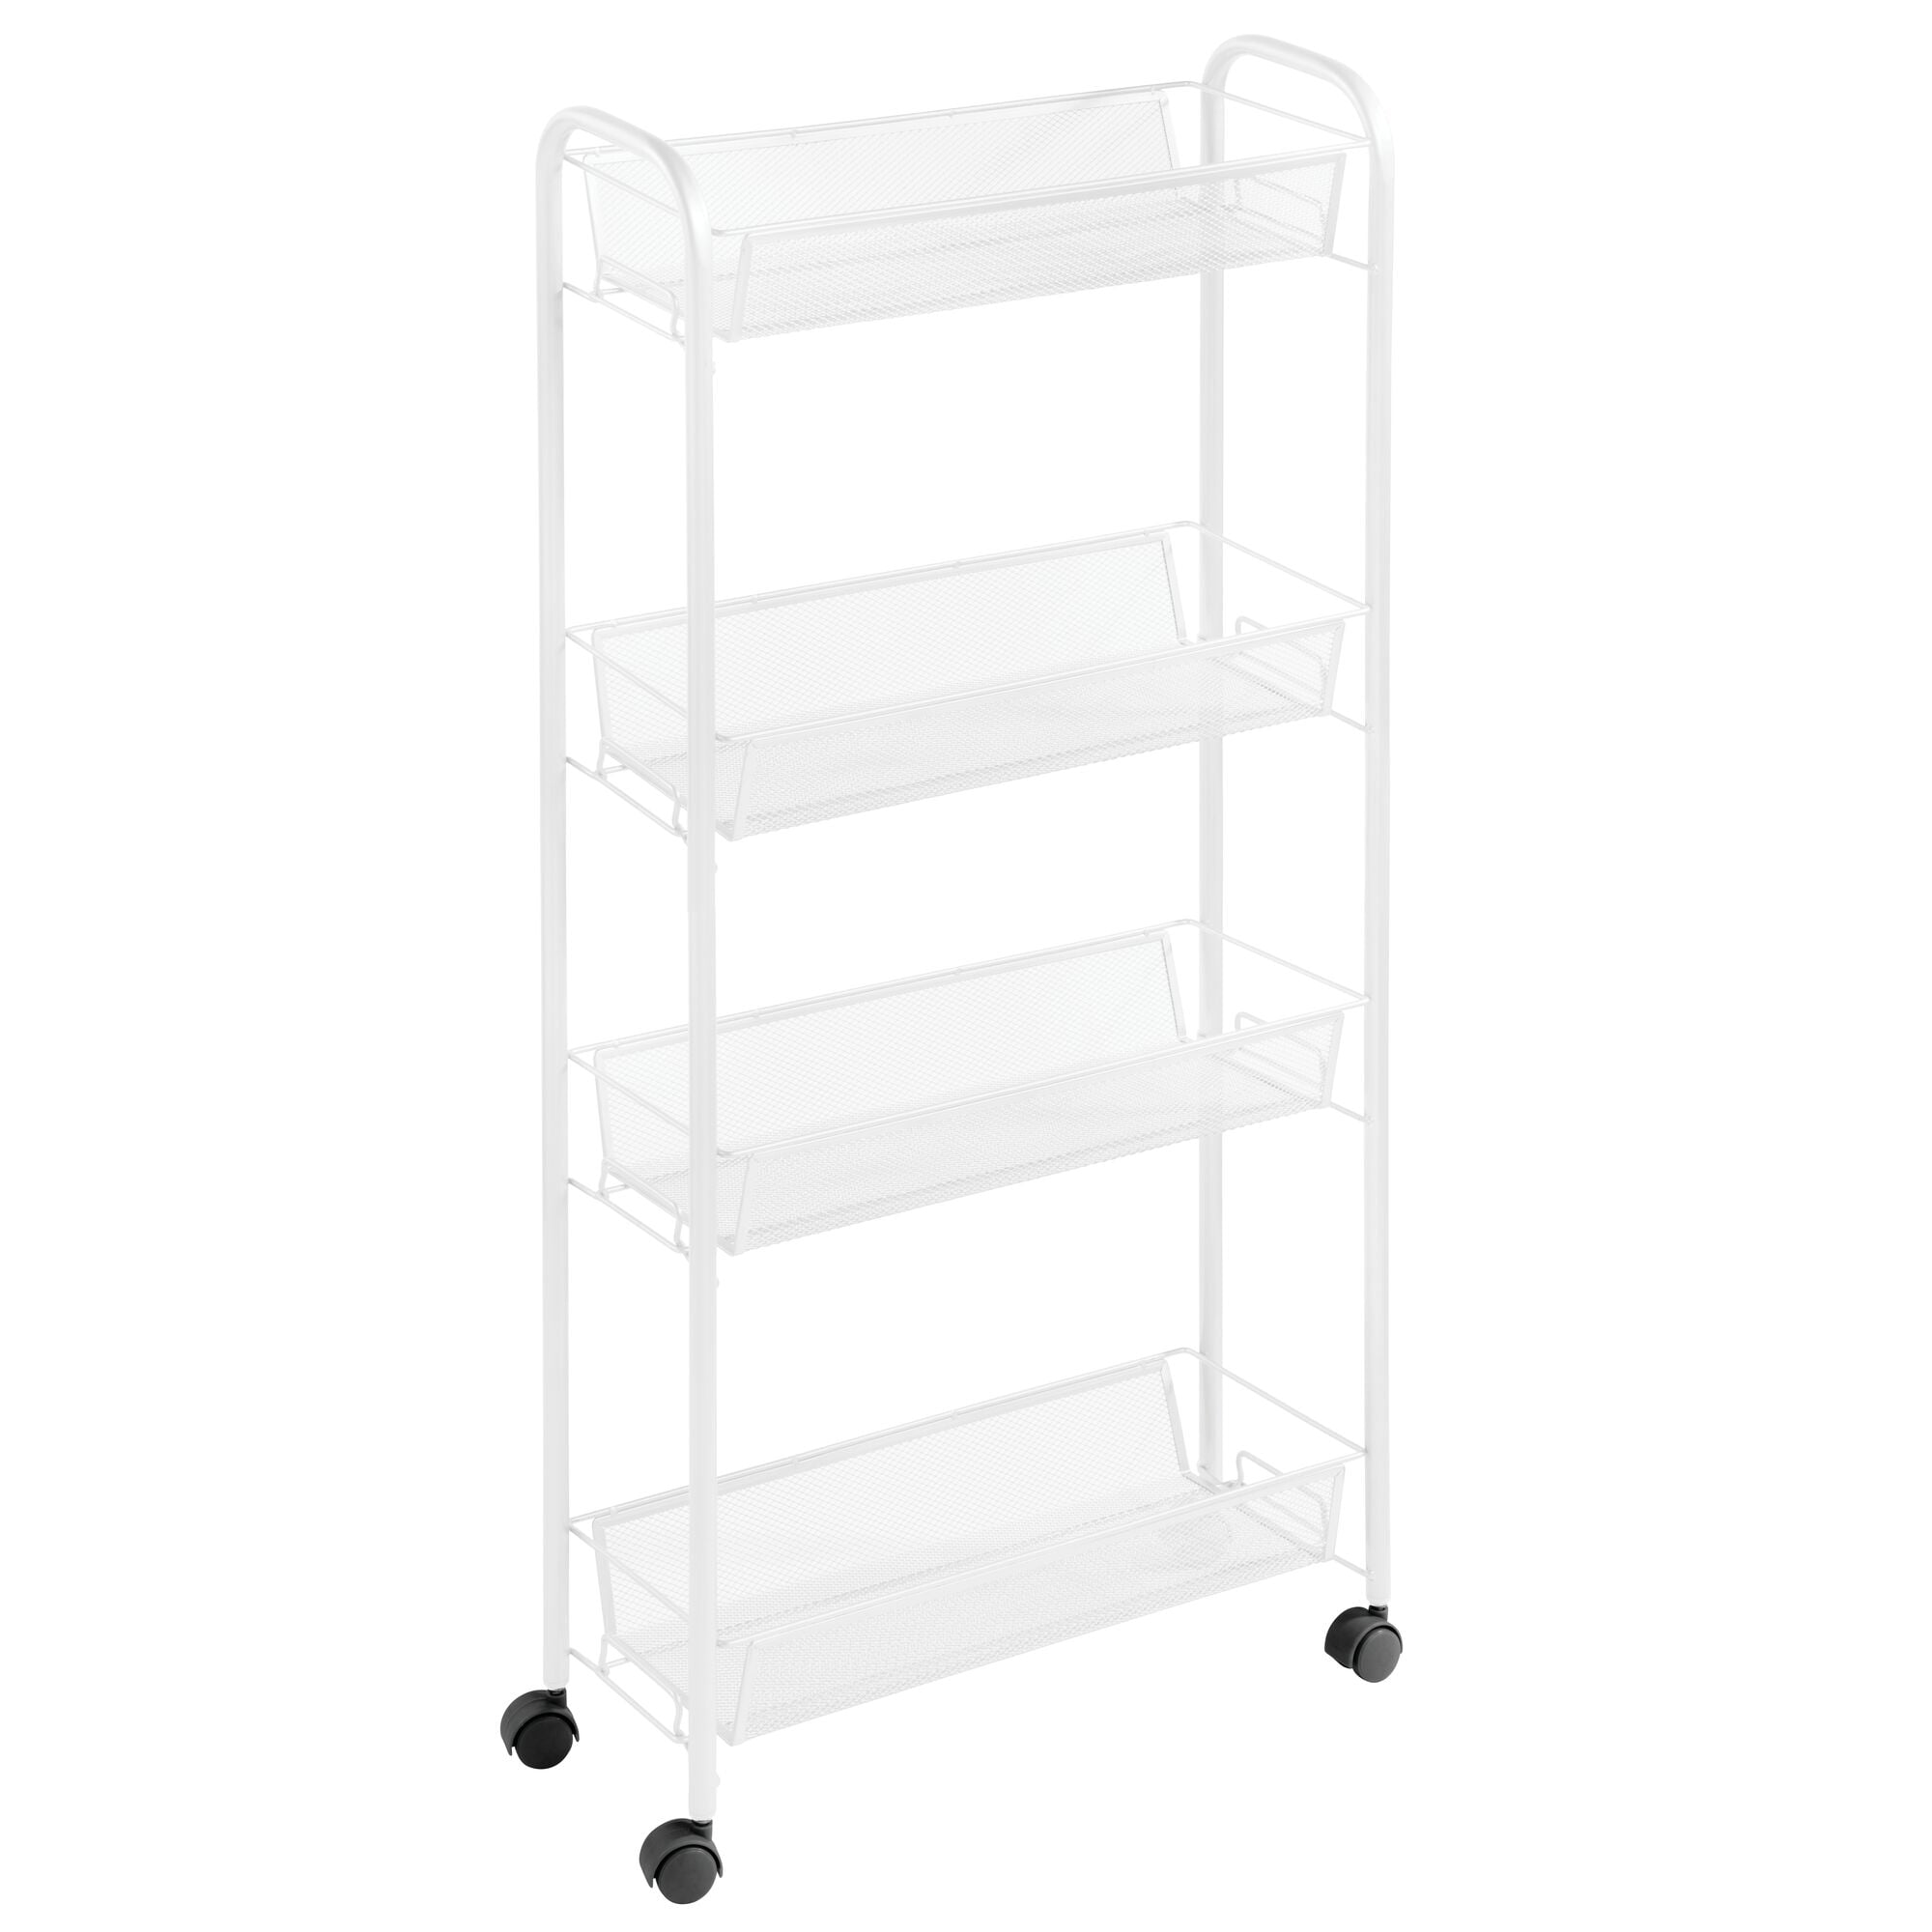 Rackaphile 4-Tier Slim Slide Out Storage Tower Rack Mesh Rolling Organization Serving Cart Shelf for Narrow Spaces Roller White 